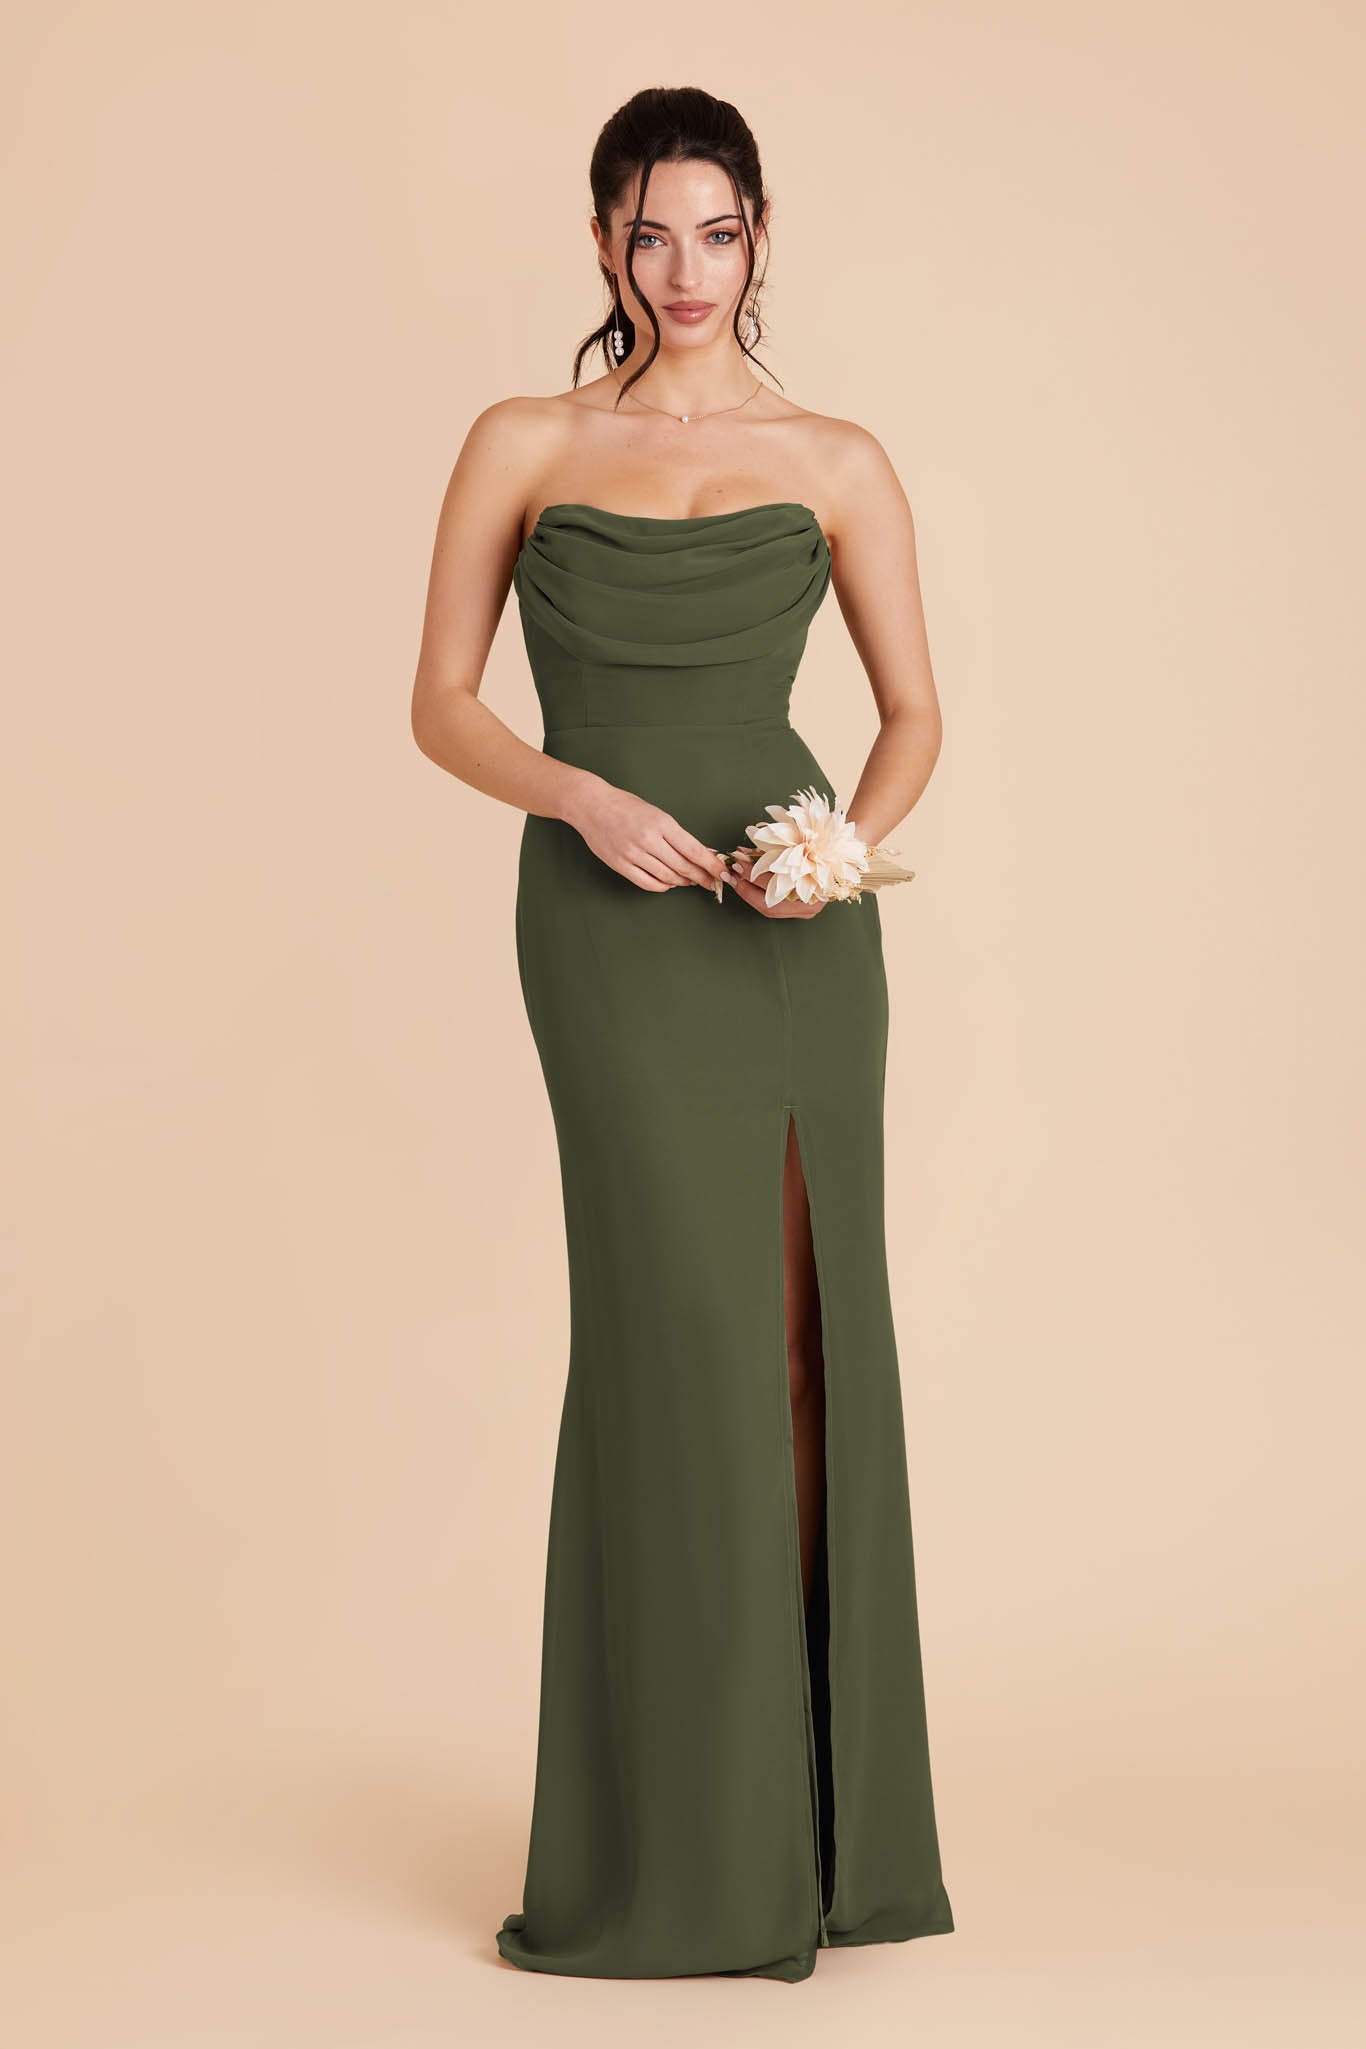 Olive Mira Convertible Dress by Birdy Grey